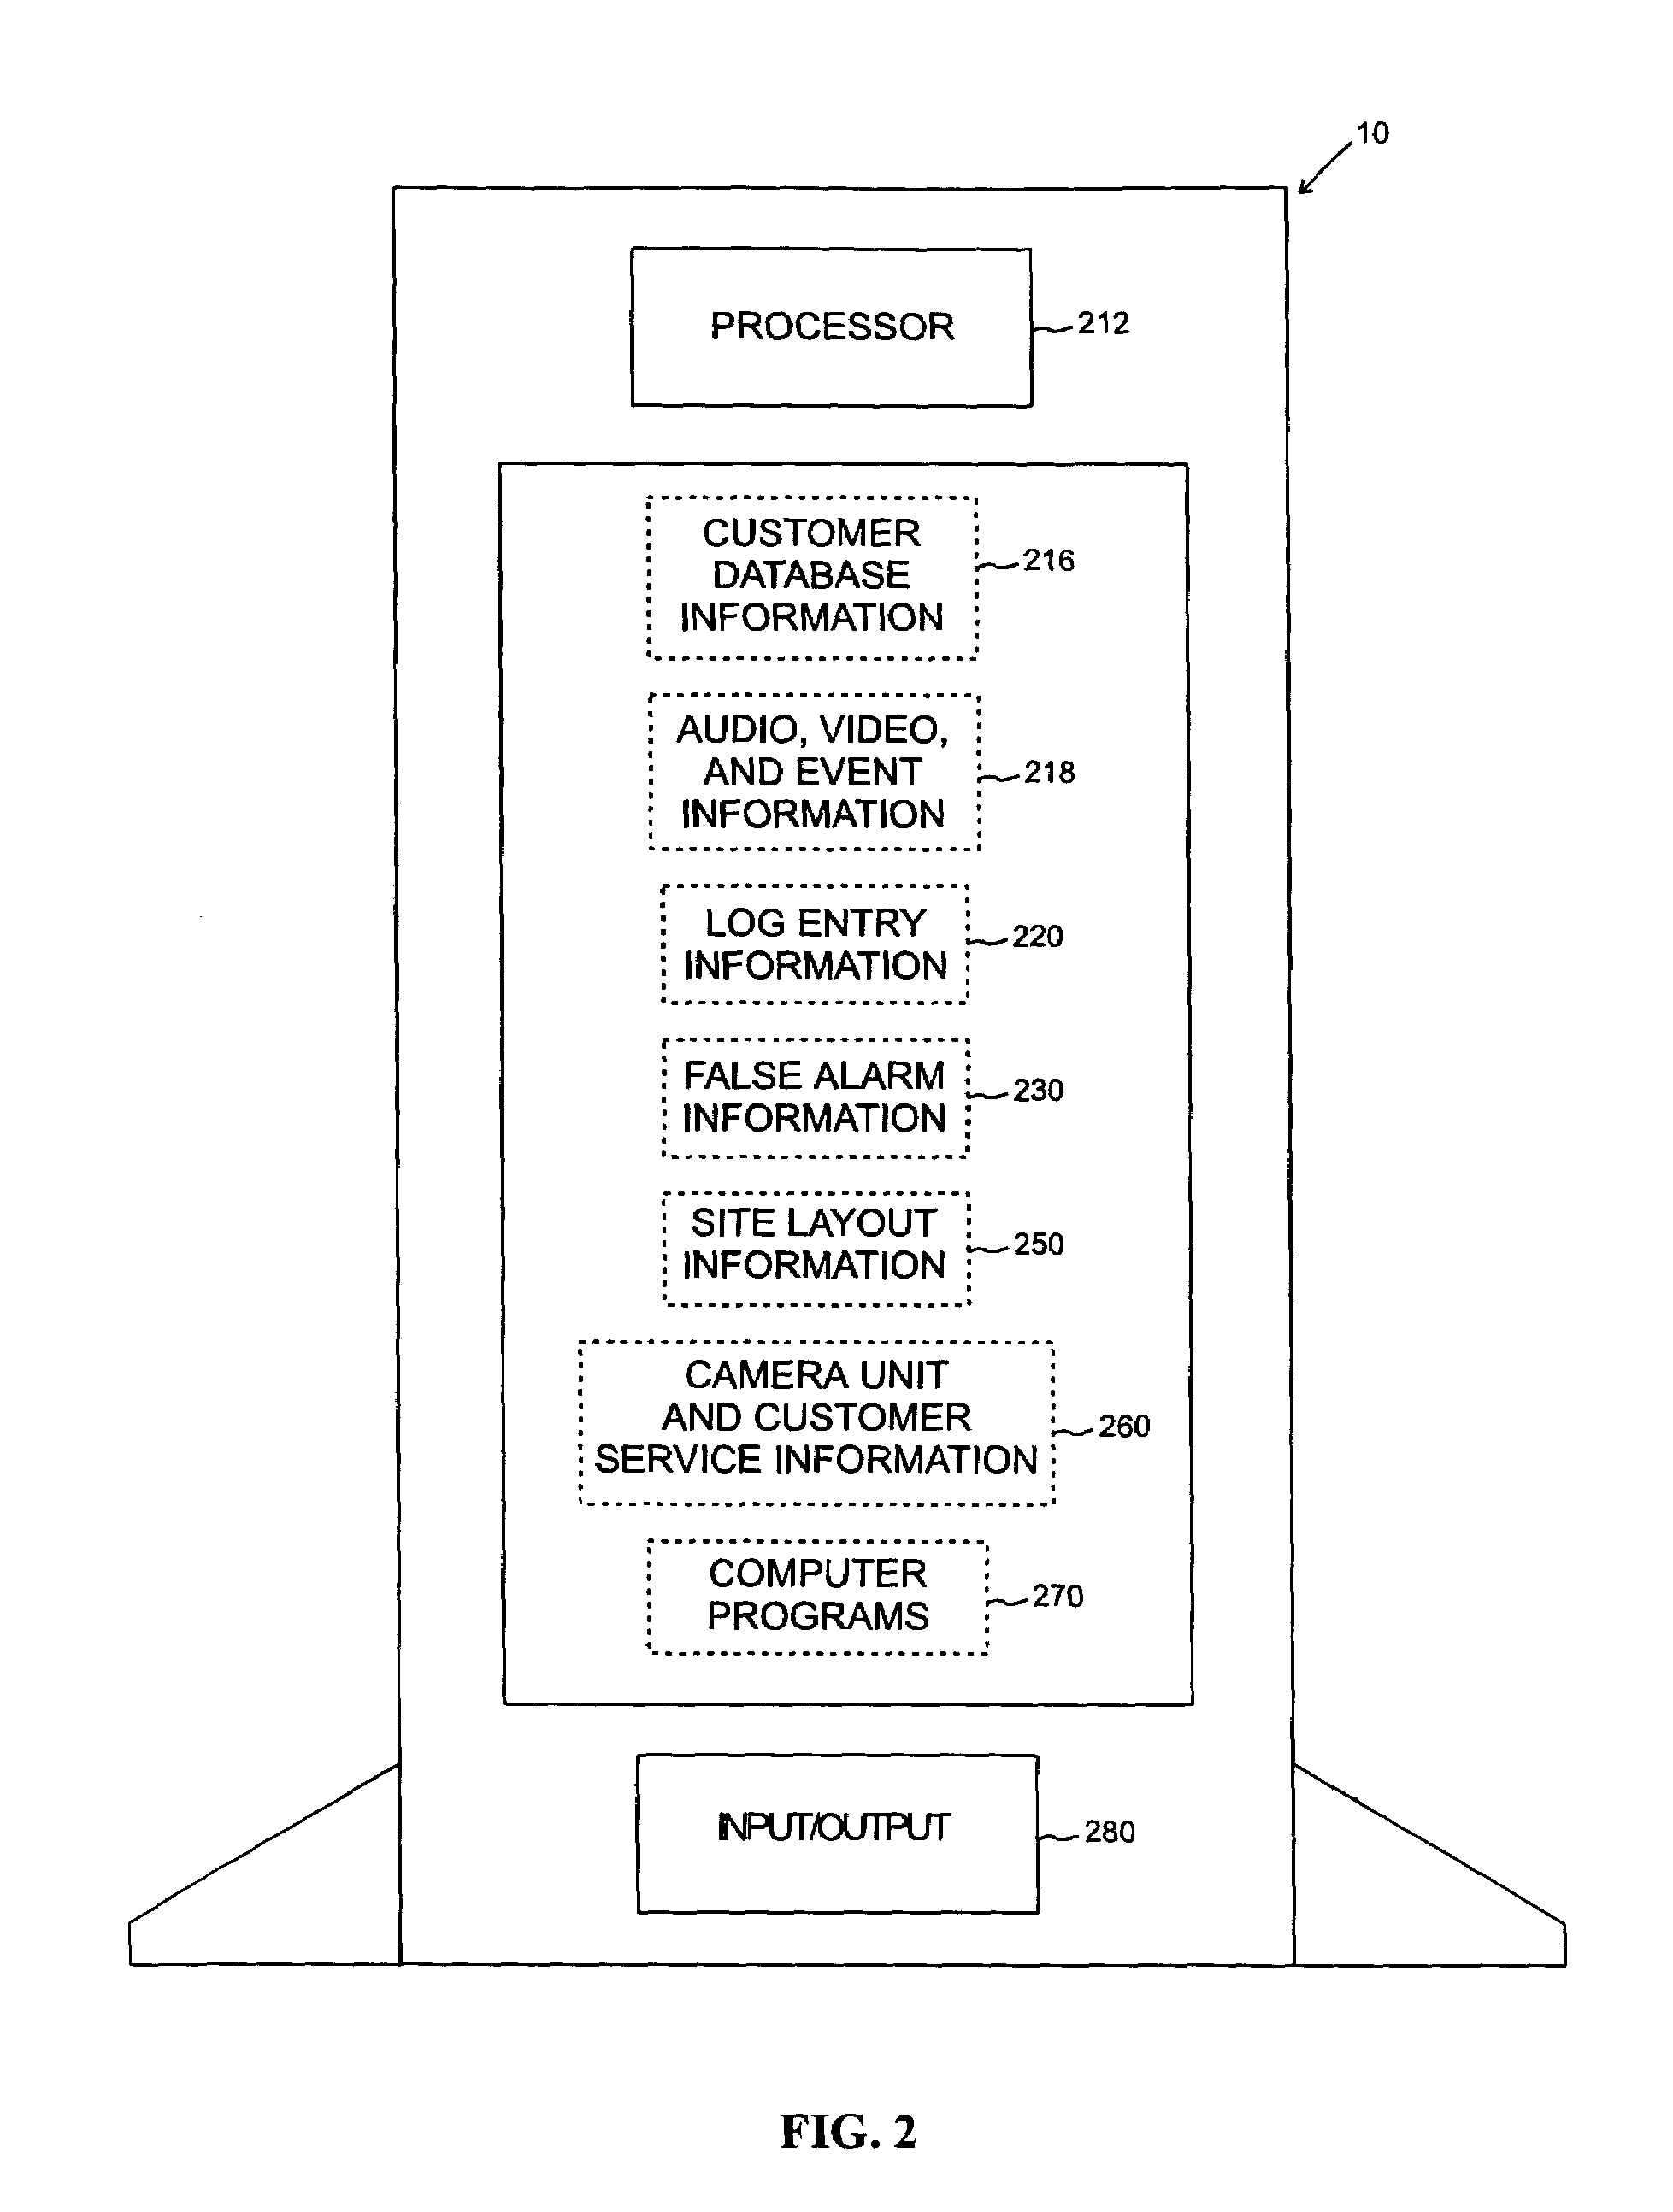 Networked digital security system and methods